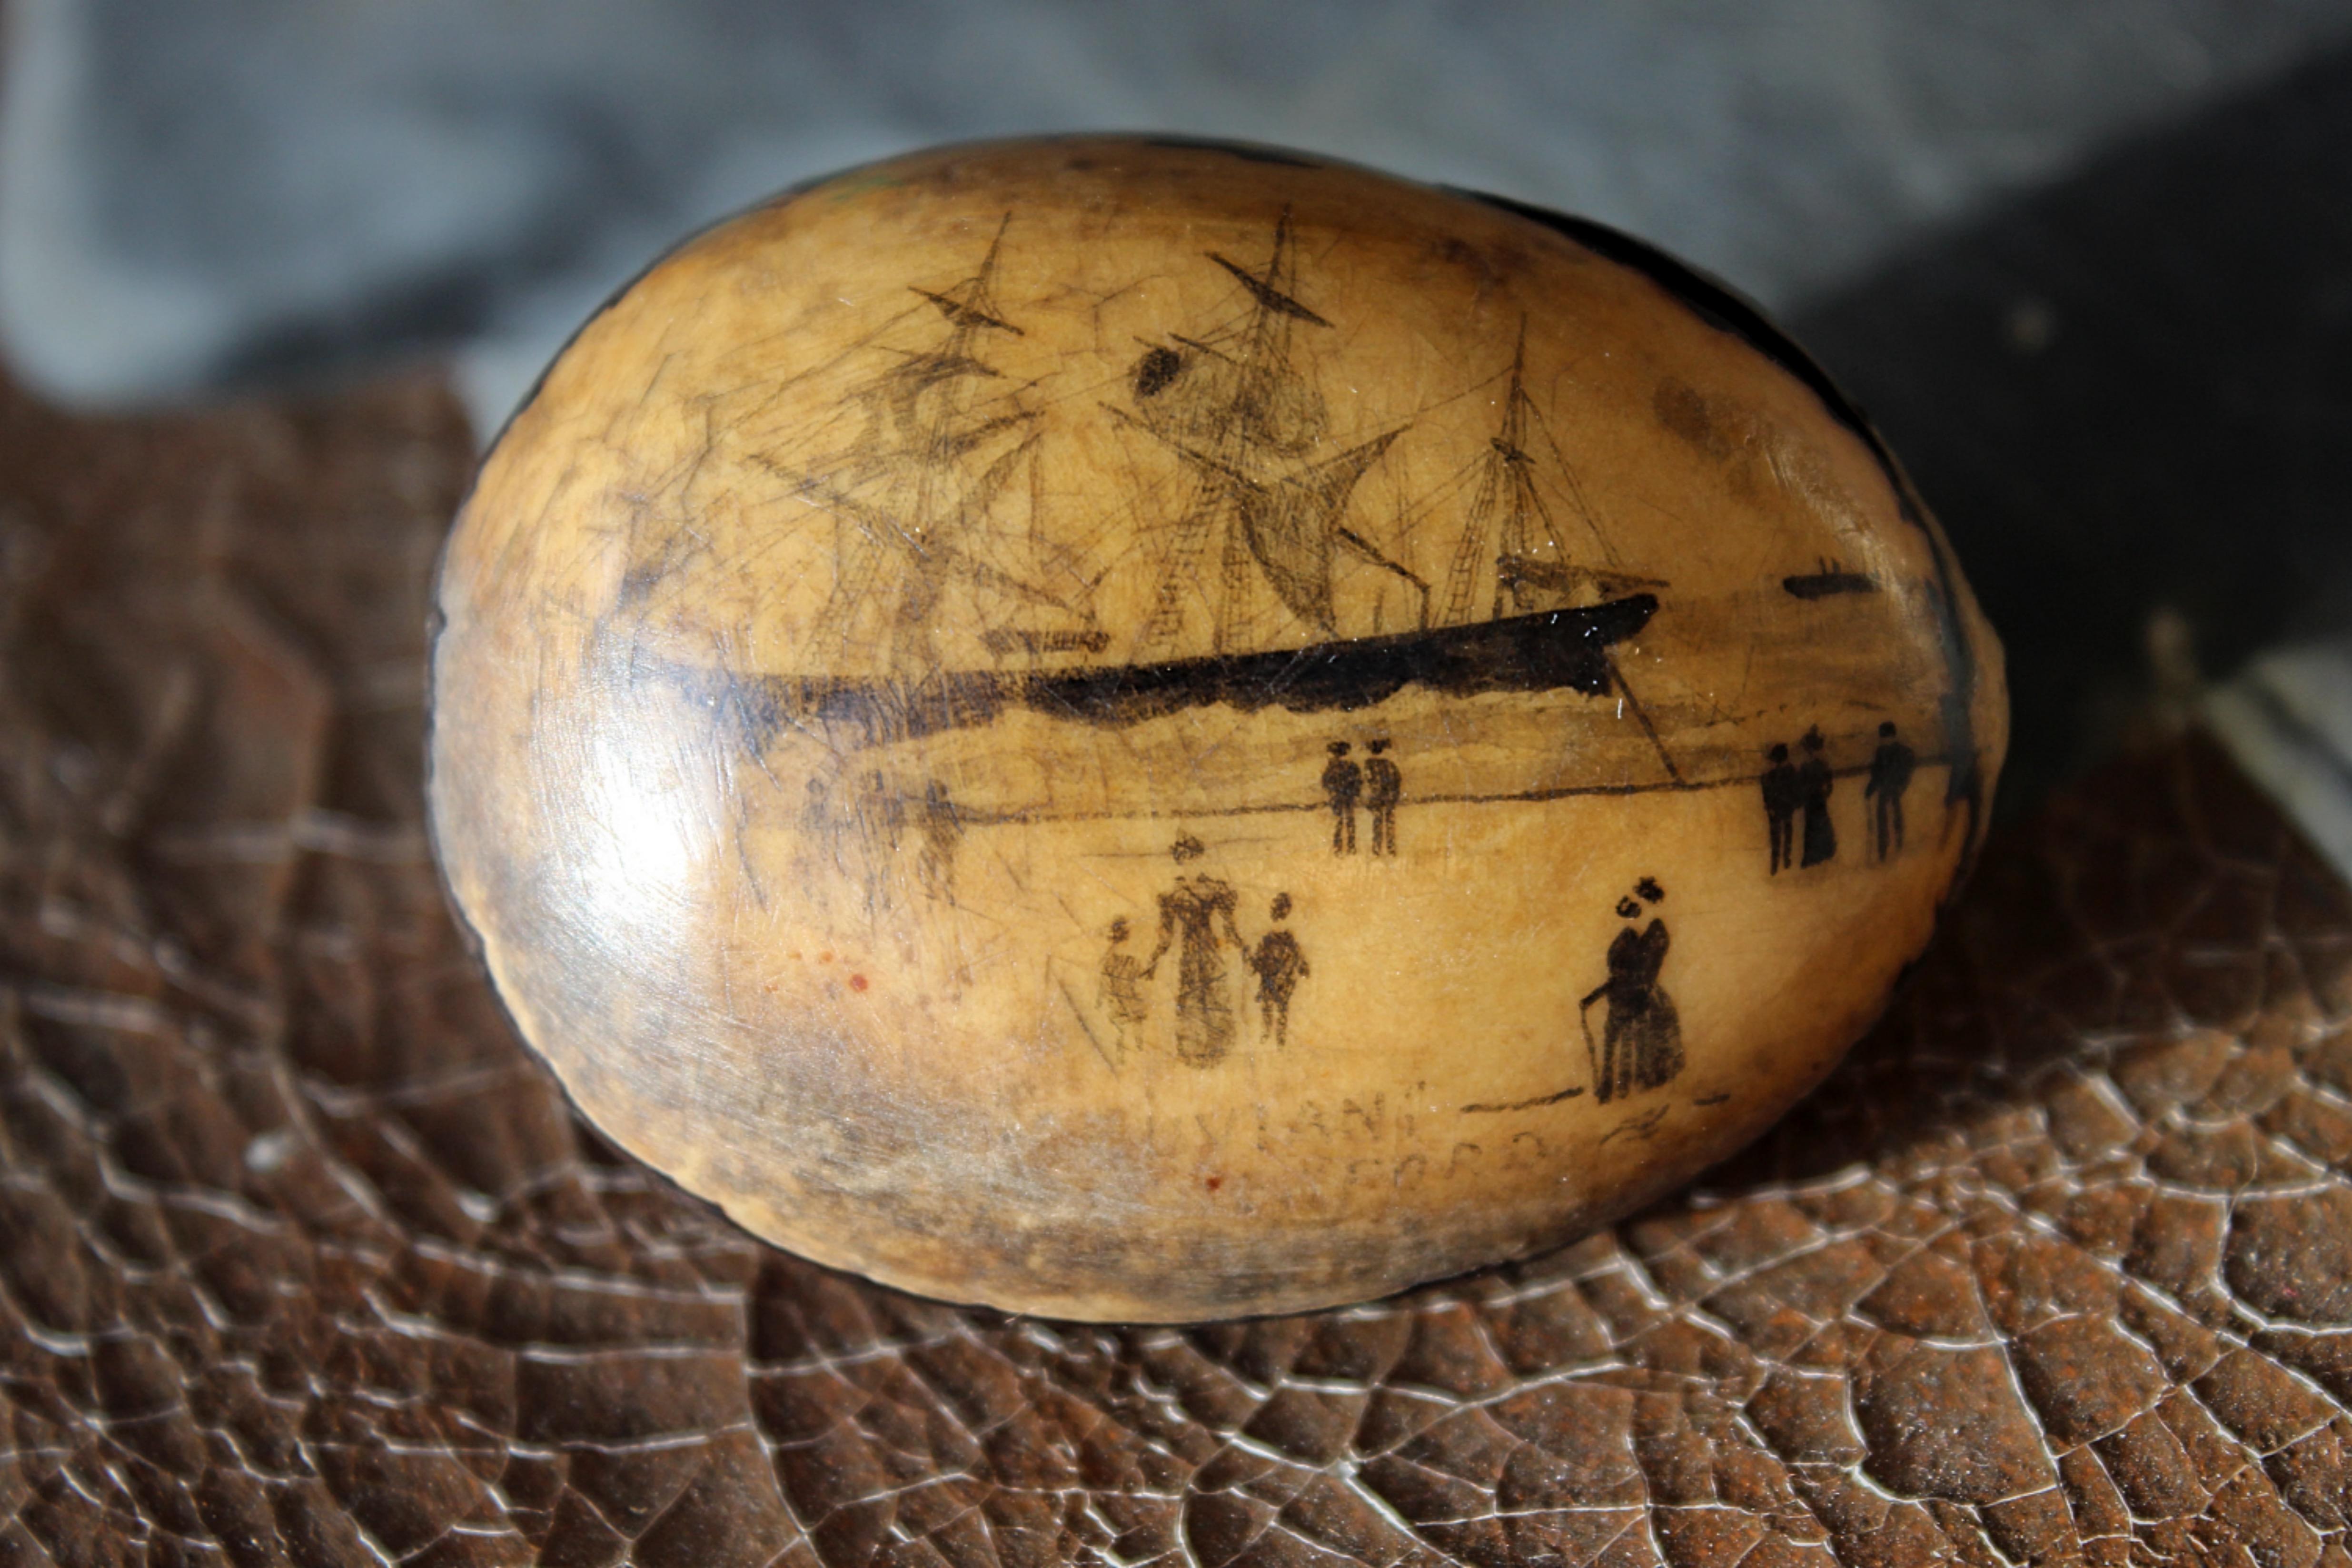 A wonderful early 19th century sailors scrimshaw nut/seed. 

Typically naive and charming, depicting a three masted ship that appears to of run aground.

The name Dylan Ford is just legible on the bottom rim

5.5/4/3cm 